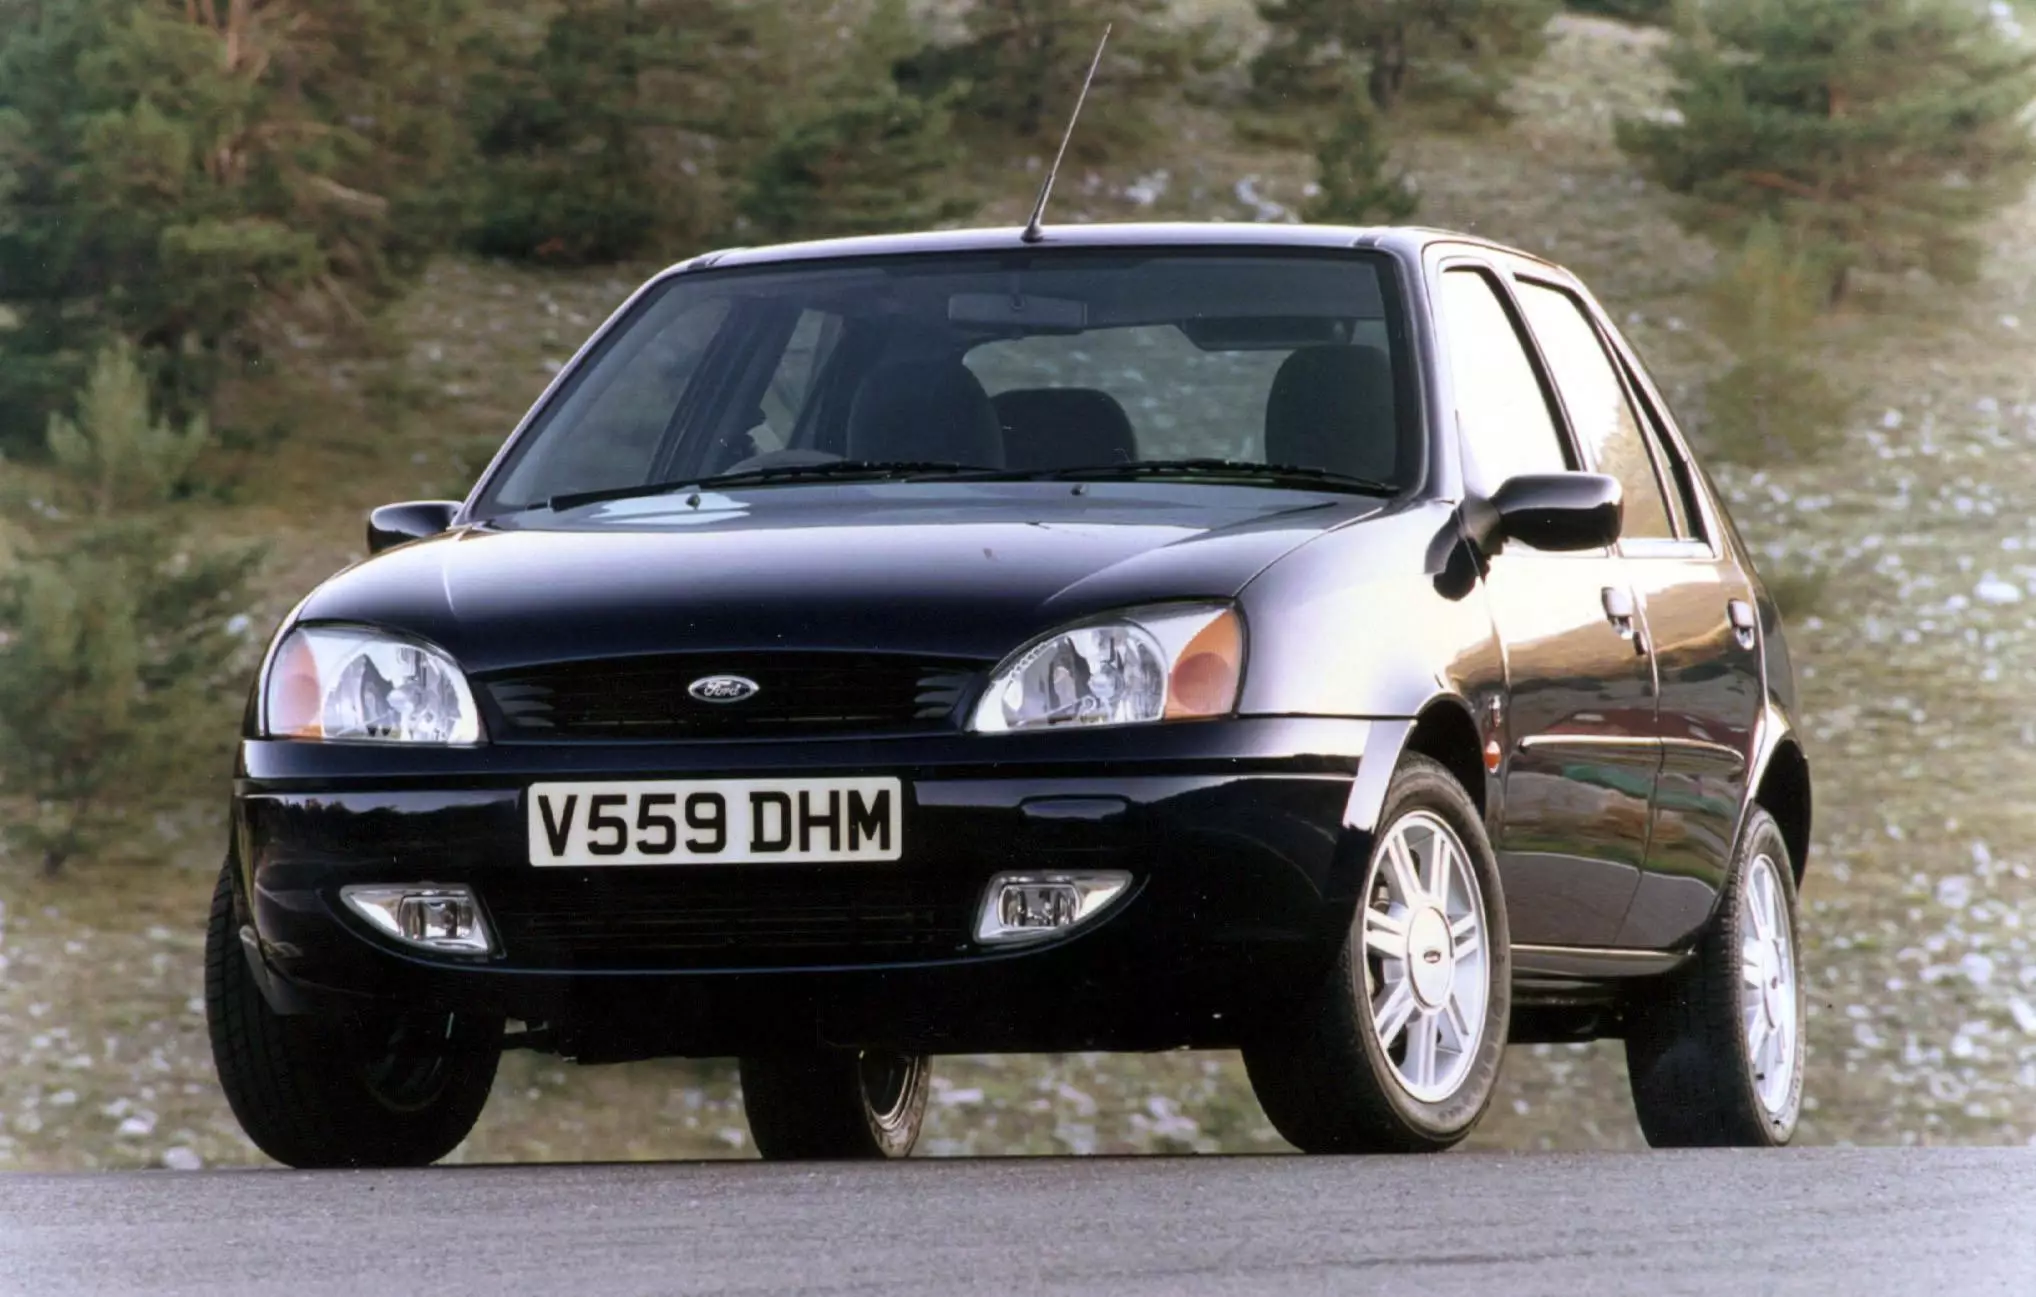 Ford drivers are the worst in the UK based on penalty points, according to a study.